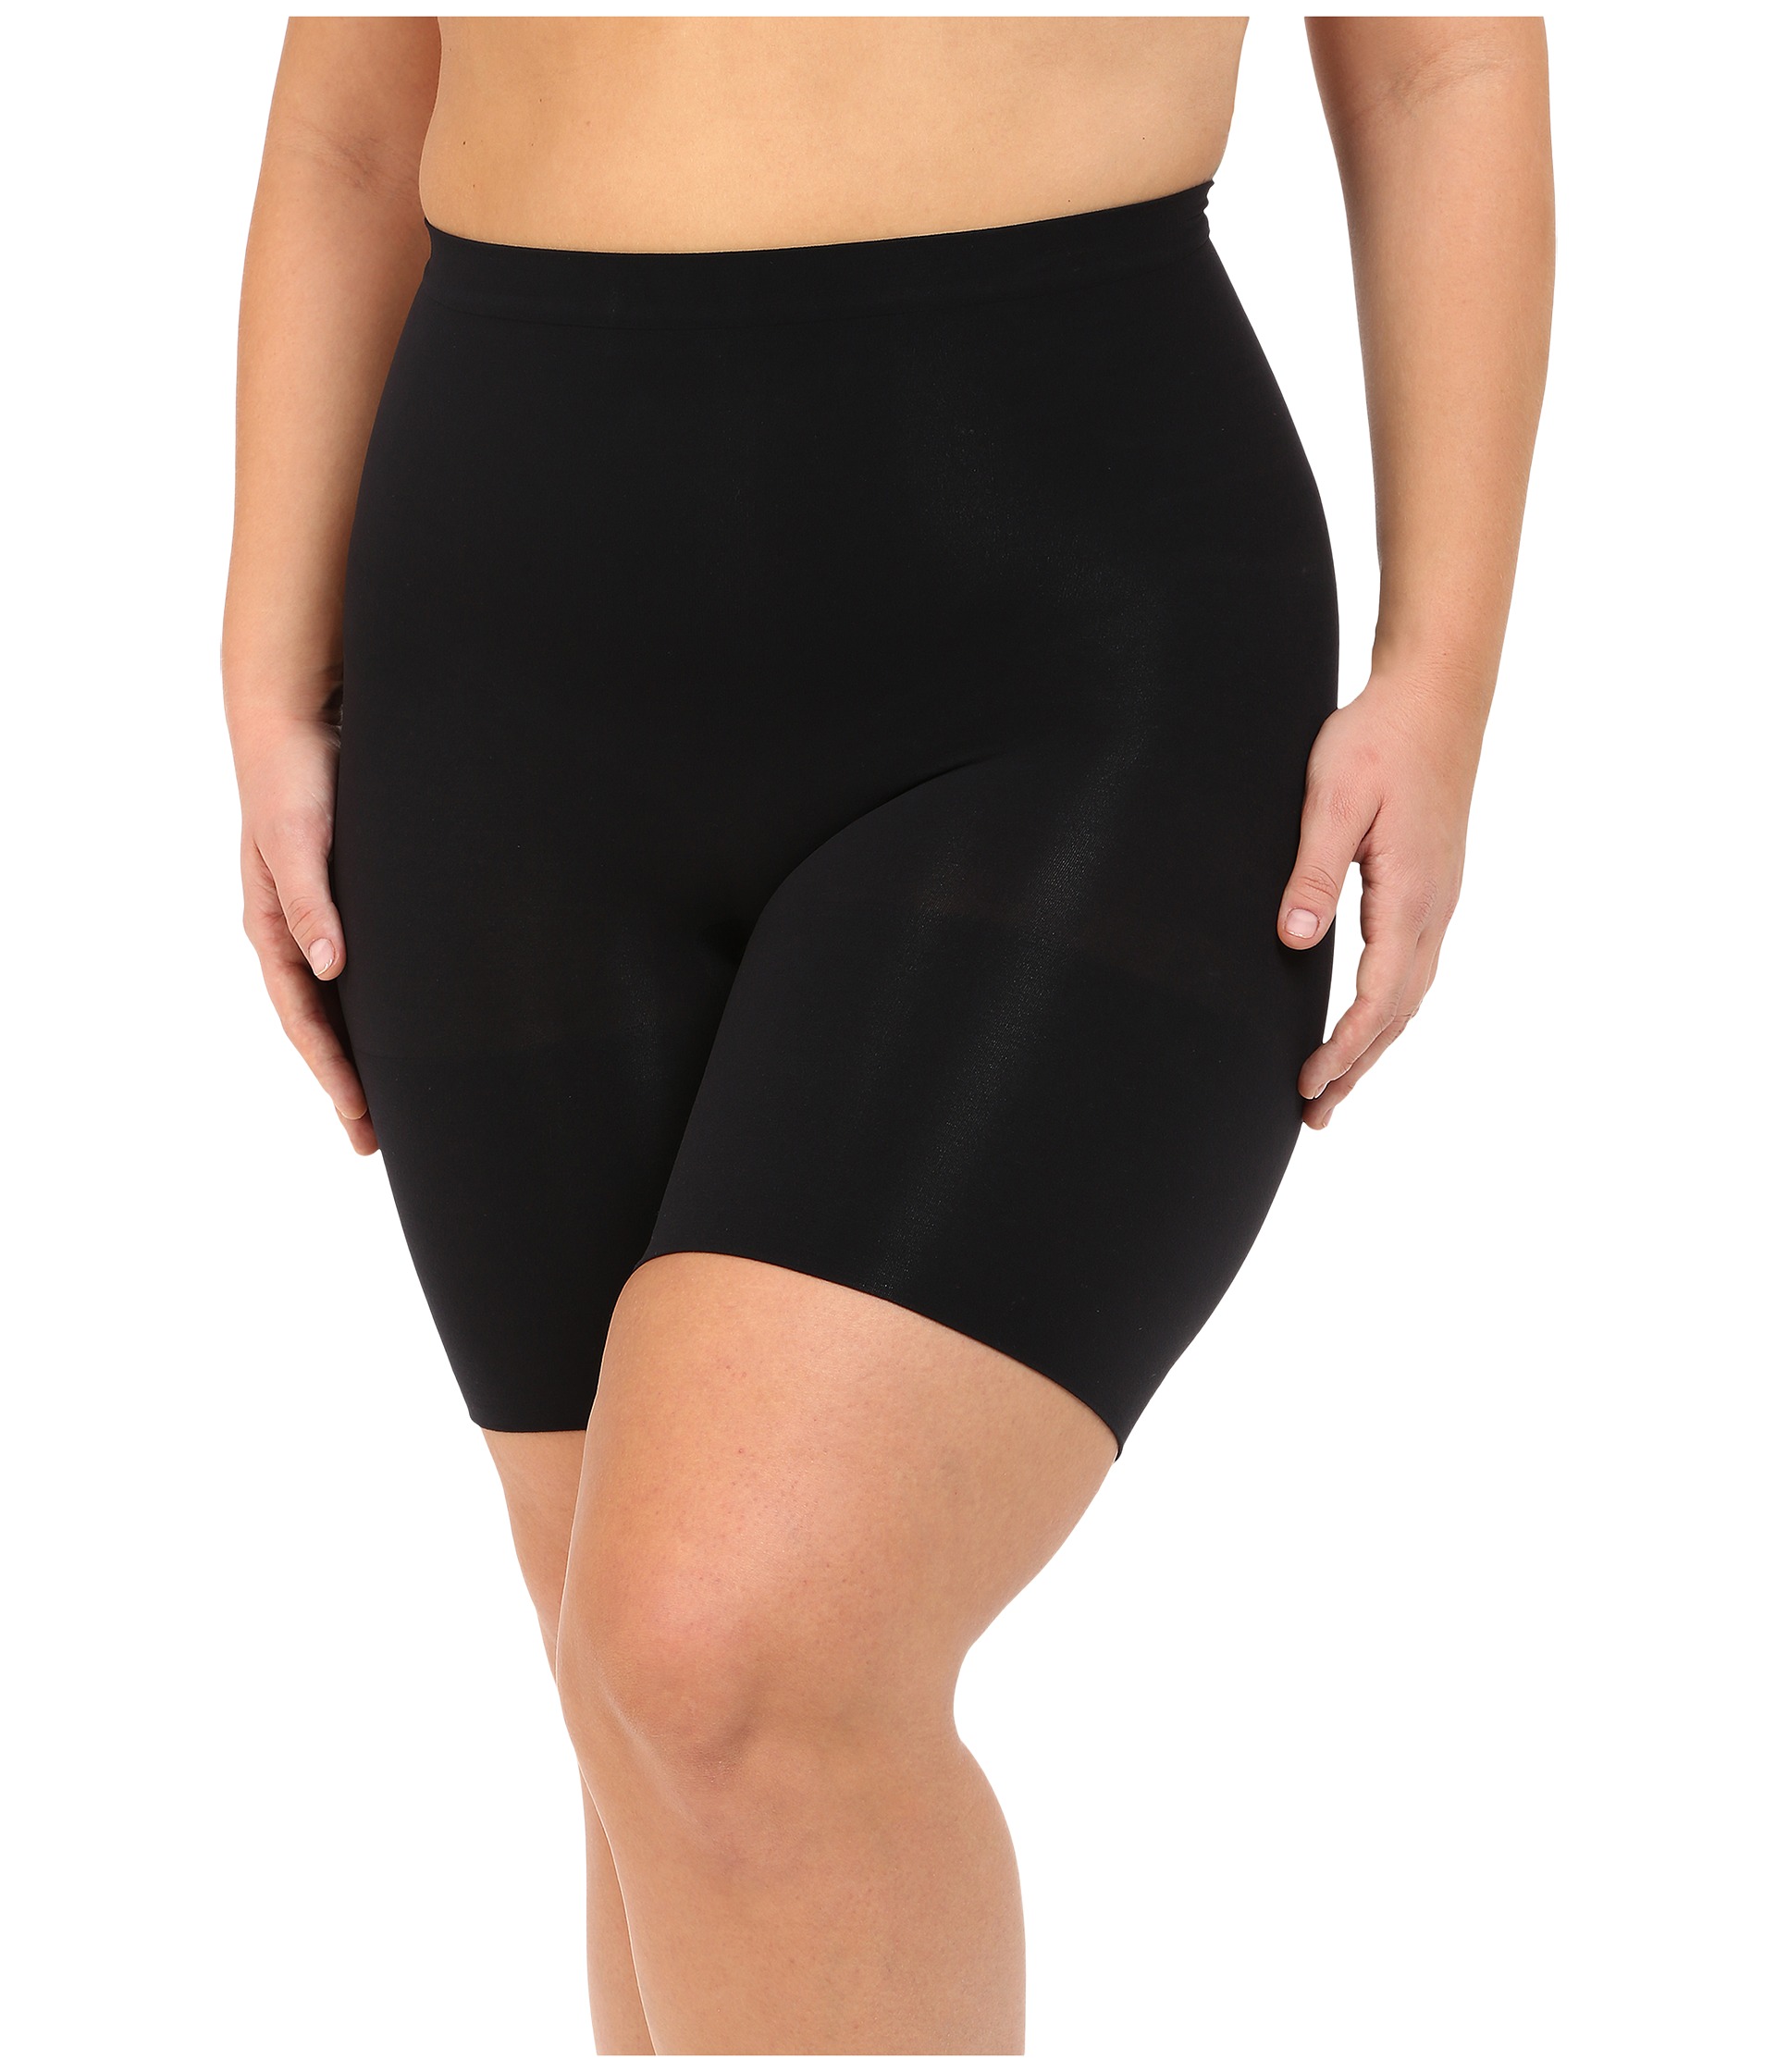 Spanx Plus Size Power Shorts at Zappos.com